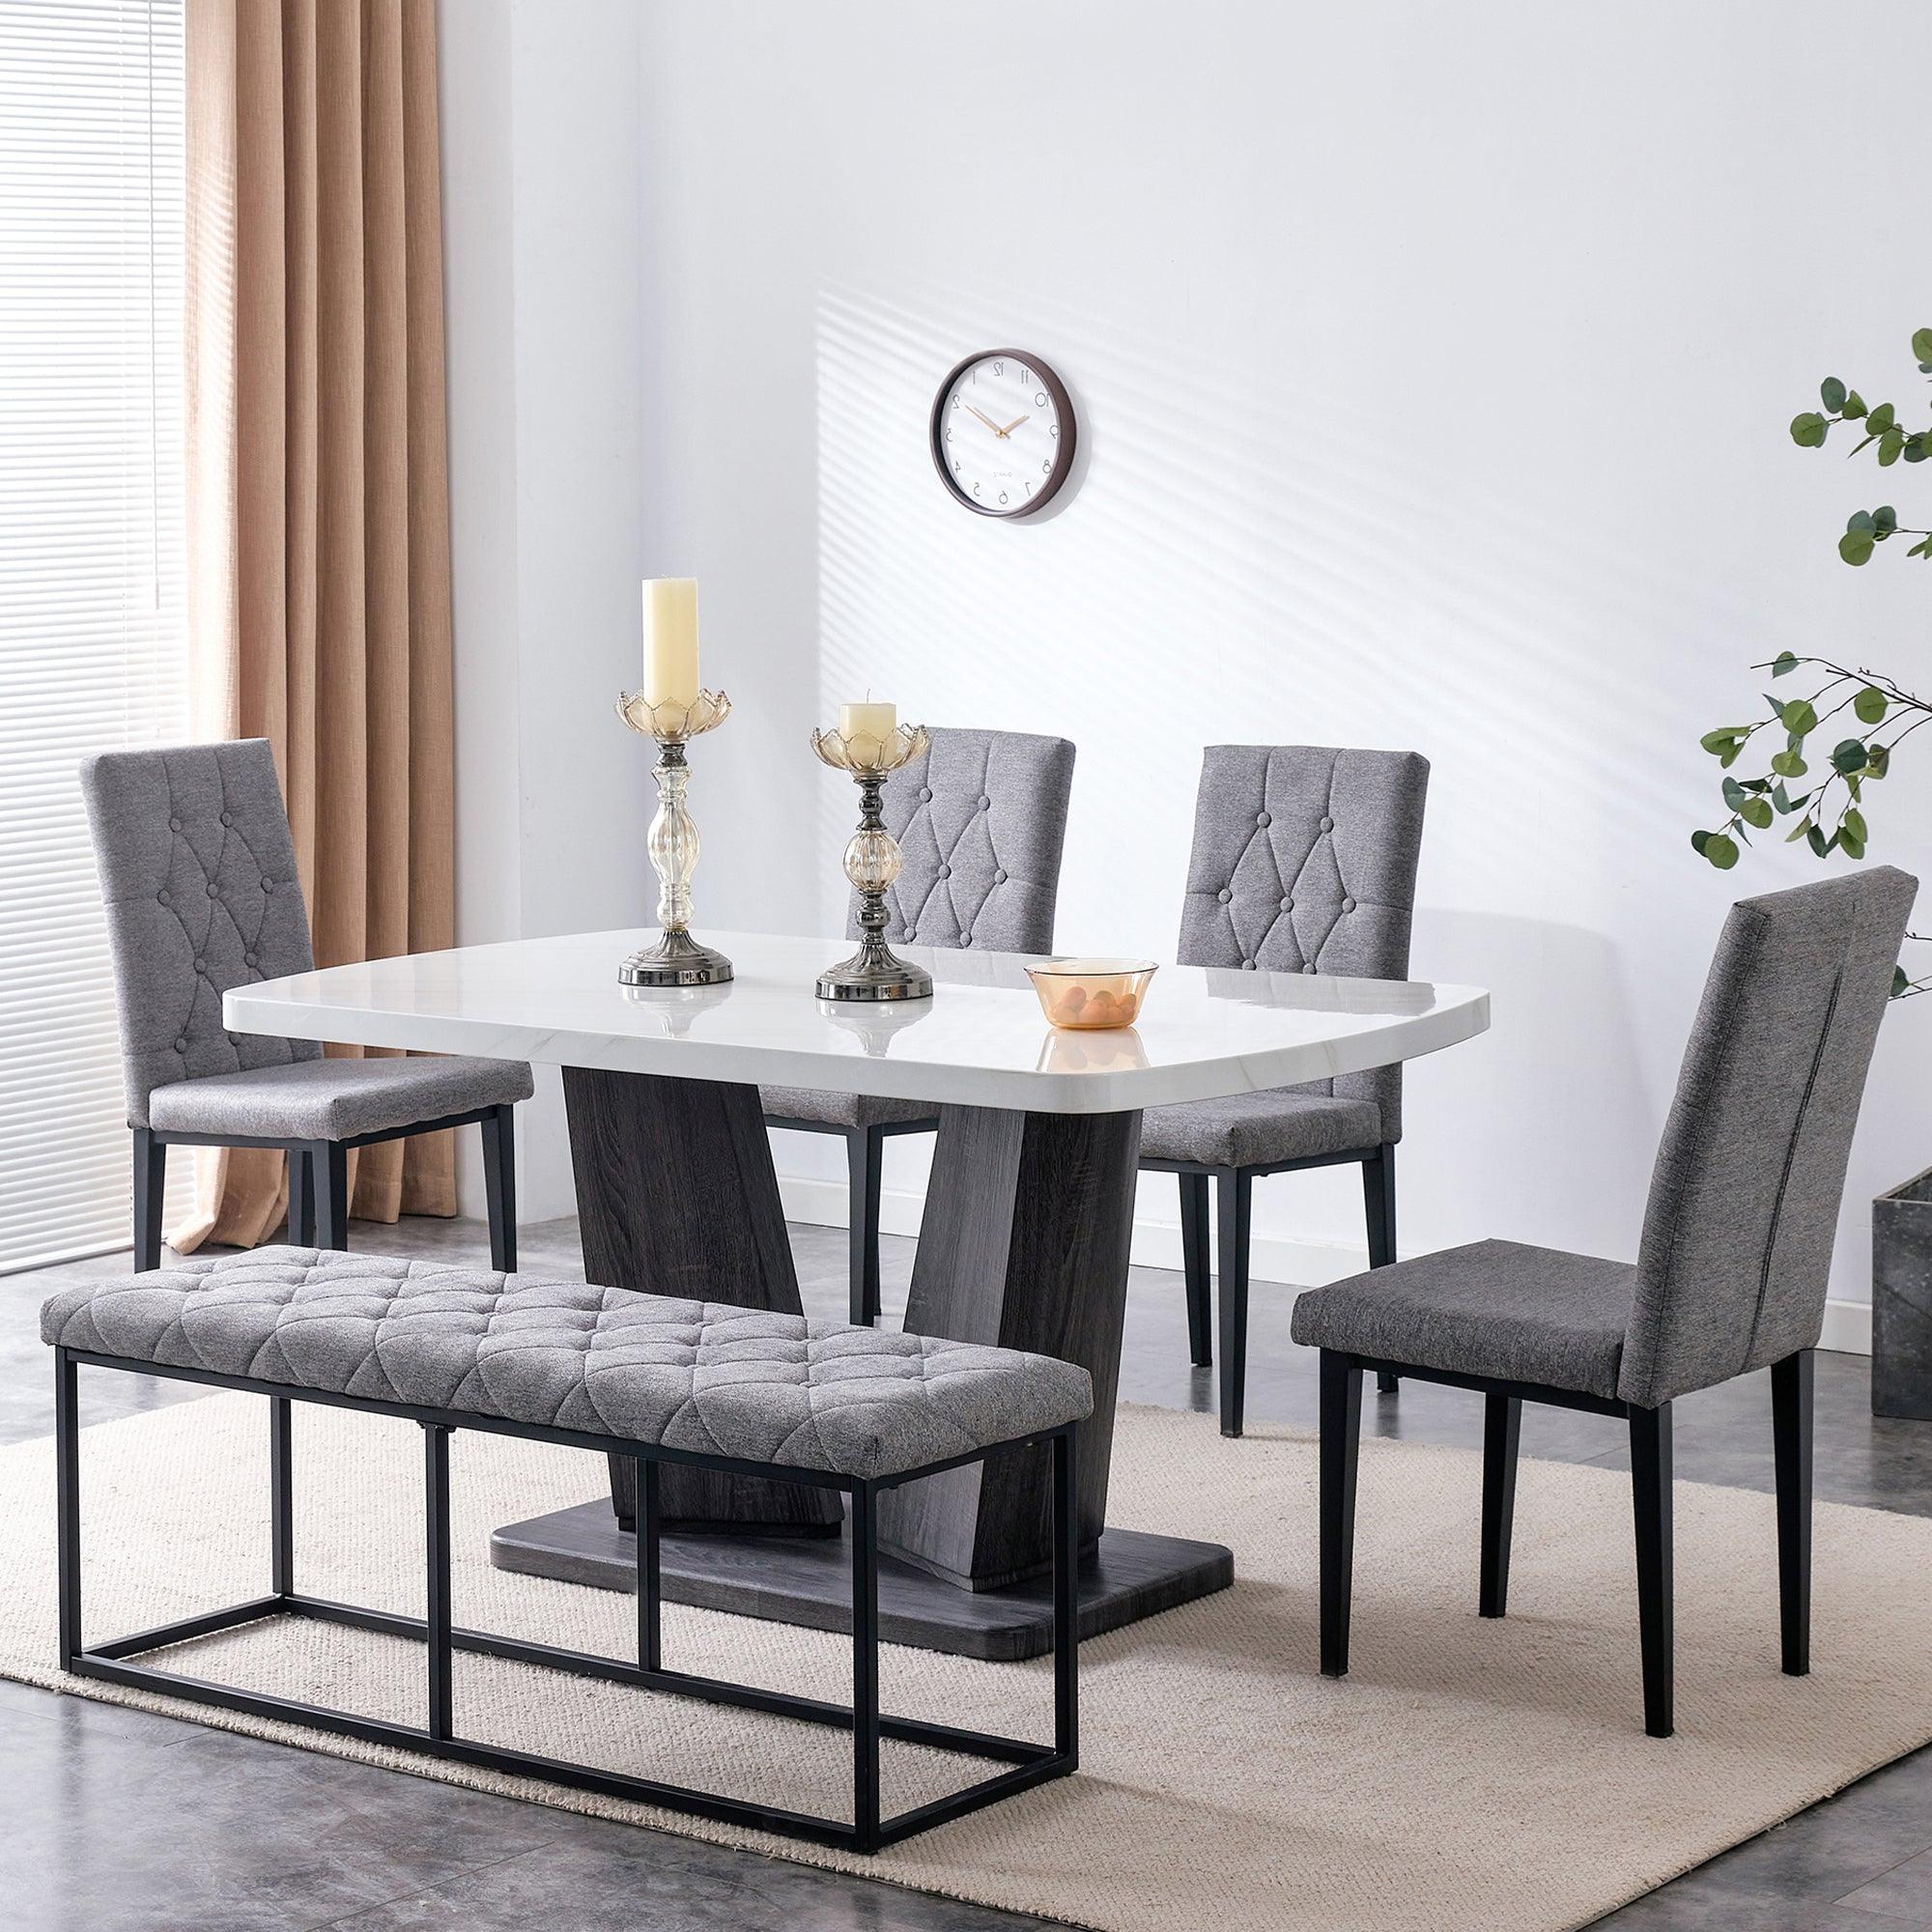 🆓🚛 63" Modern Style 6-Piece Dining Table With 4 Chairs & 1 Bench, Table With Marbled Veneers Tabletop & V-Shaped Table Legs, White